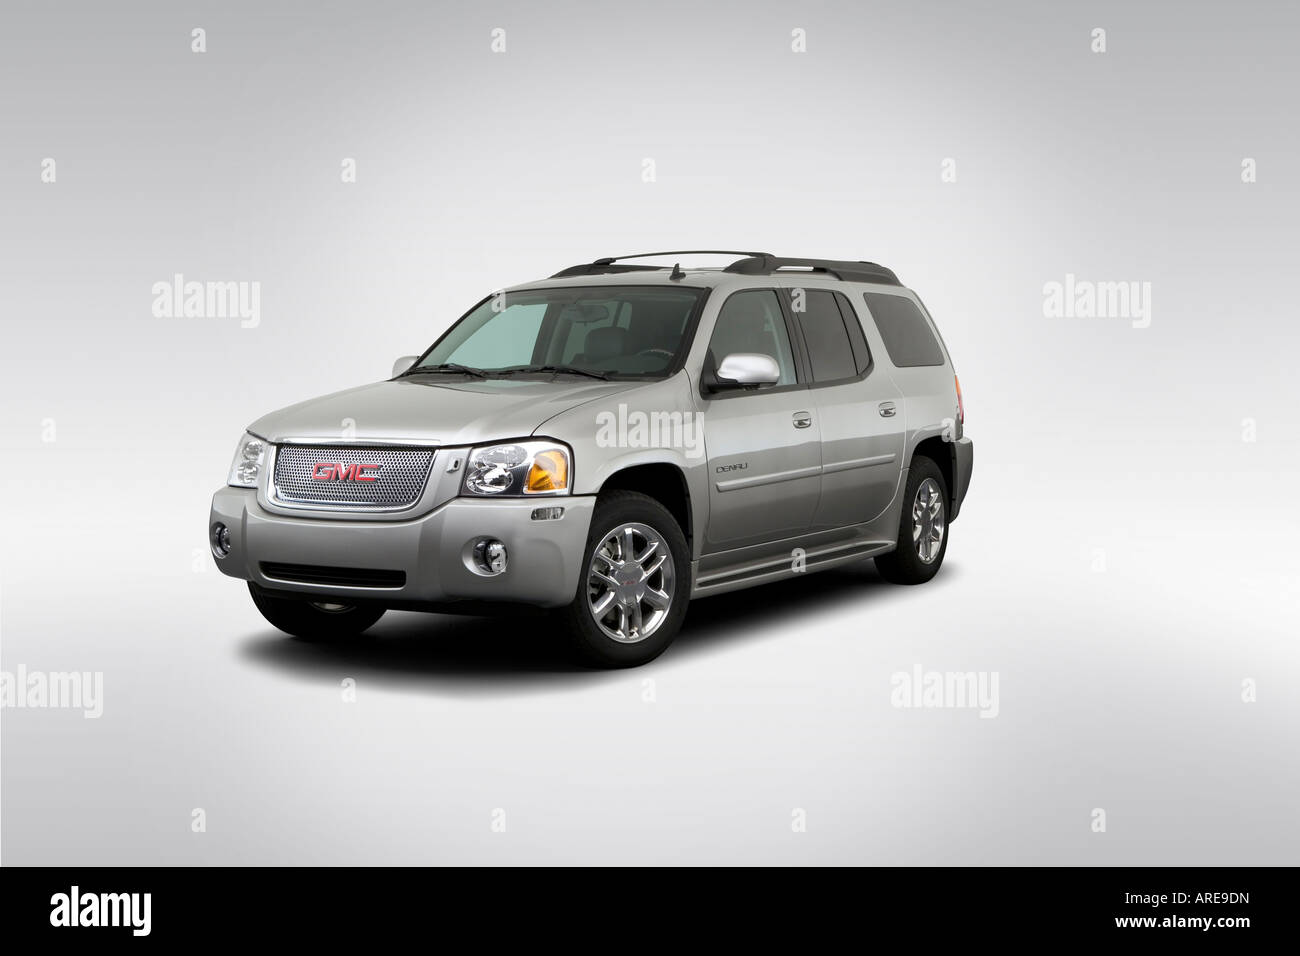 2006 GMC Envoy XL Denali in Silver - Front angle view Stock Photo - Alamy